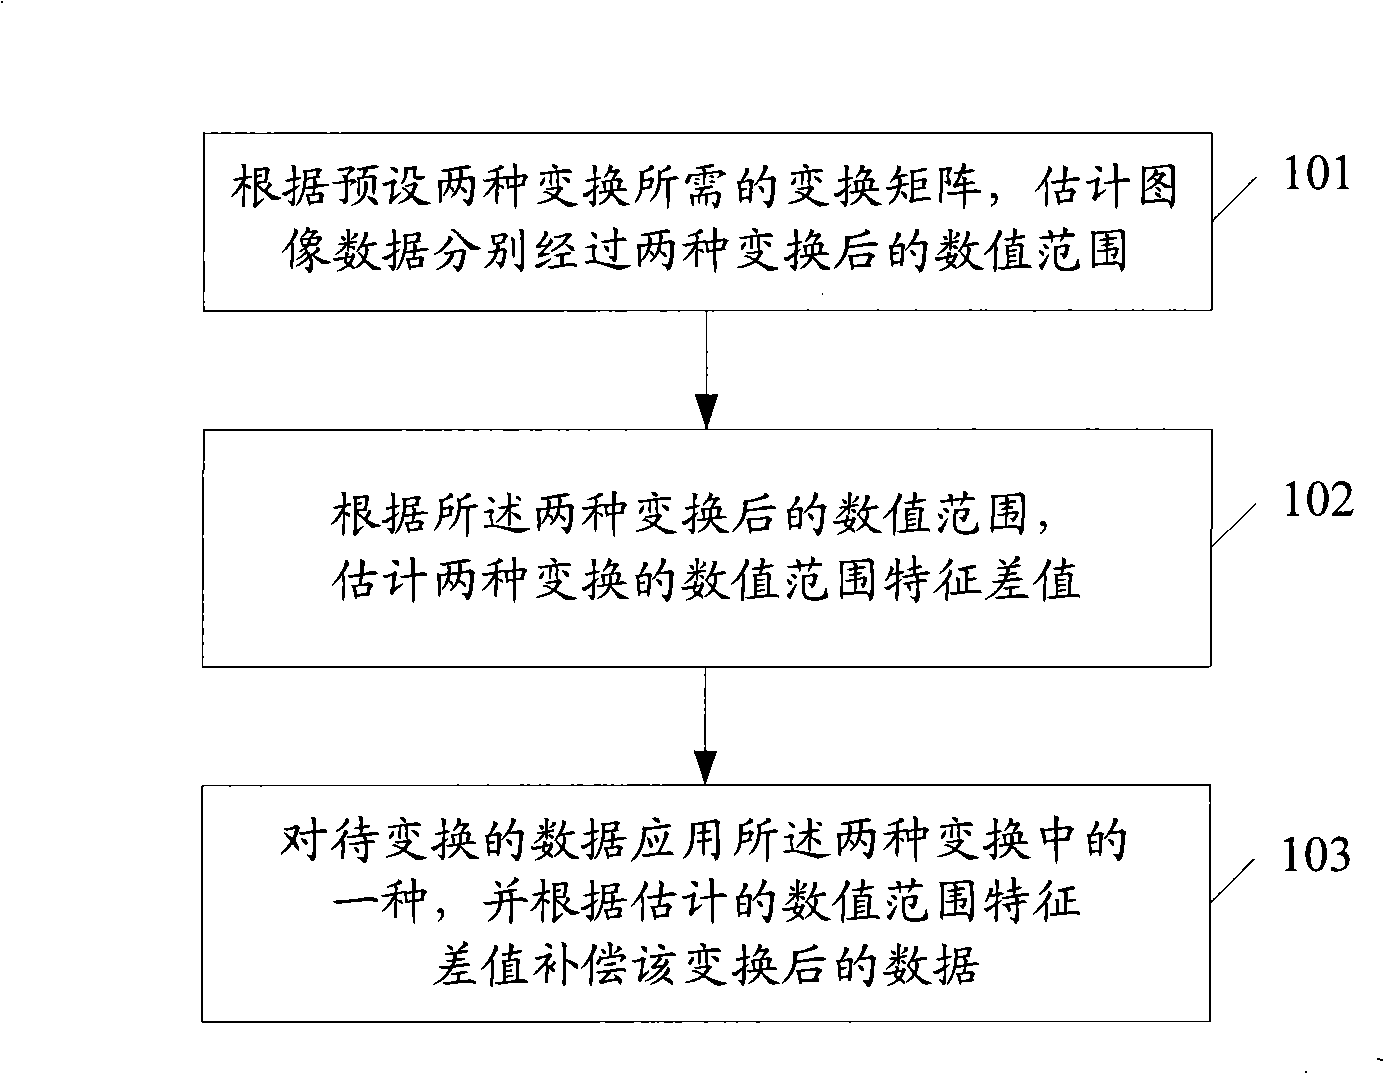 Method and apparatus for processing transformation data, method and apparatus for encoding and decoding